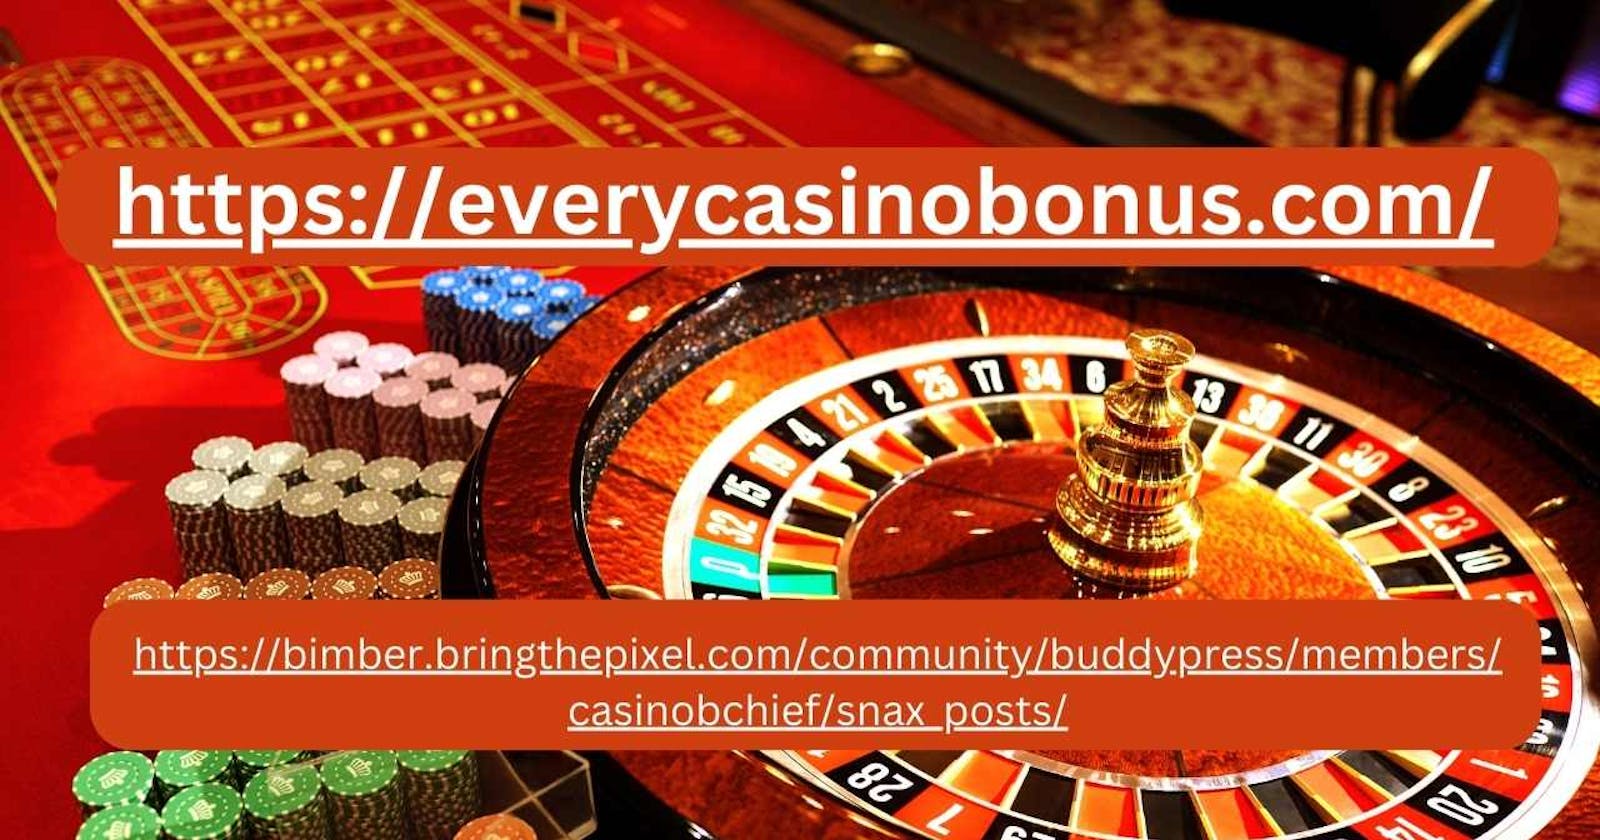 The Best Guide to Online Casino Bonuses